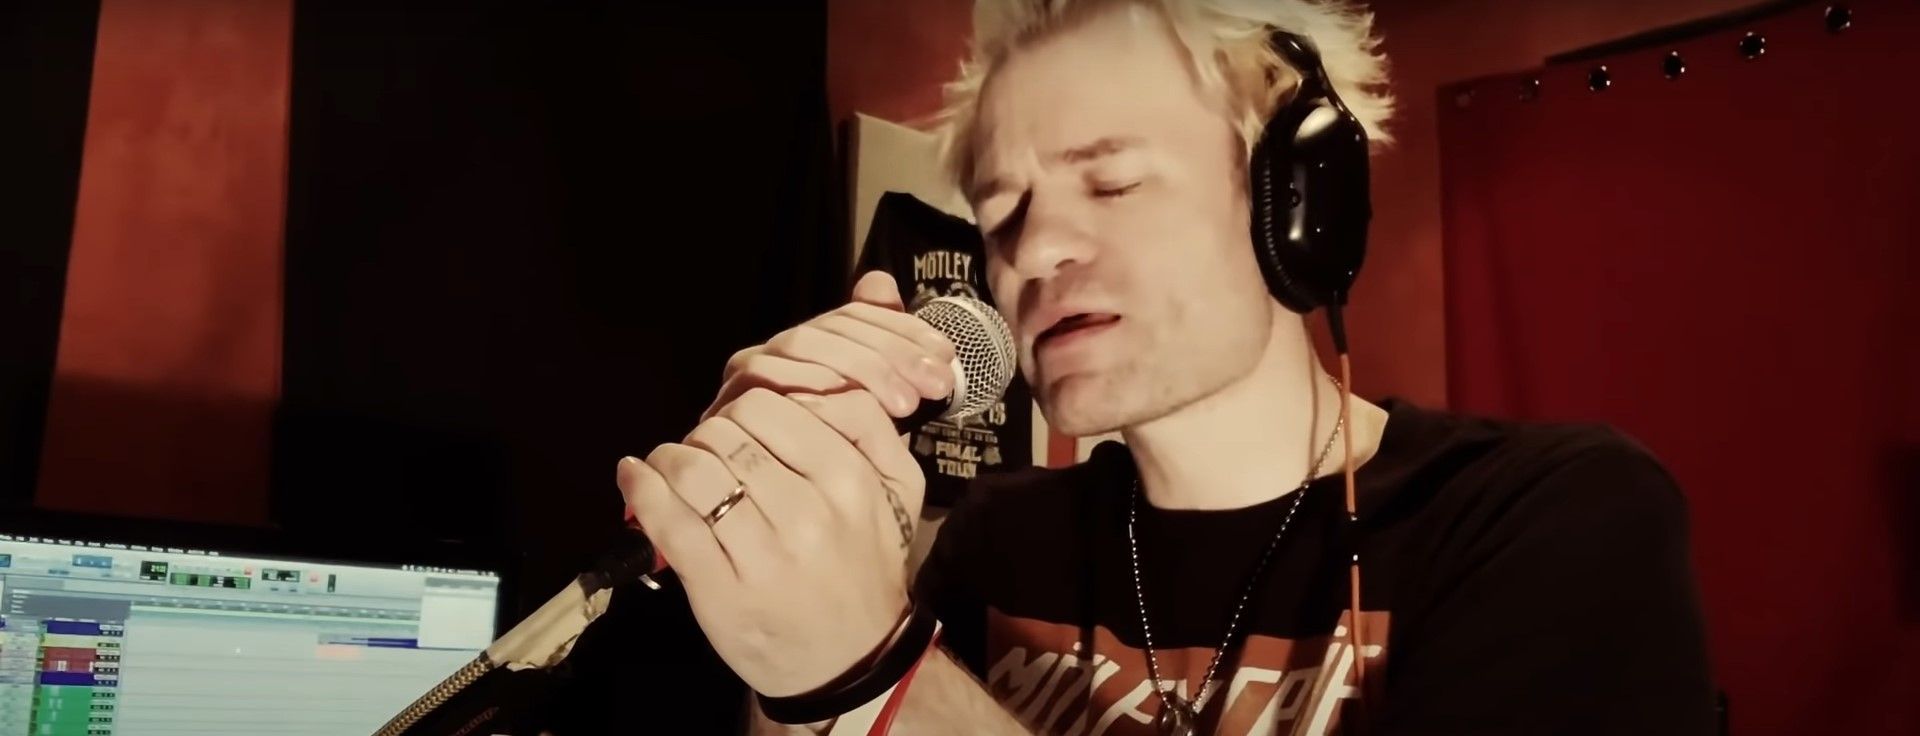 Sum 41 - Never There (Live At Home Studio 2020)